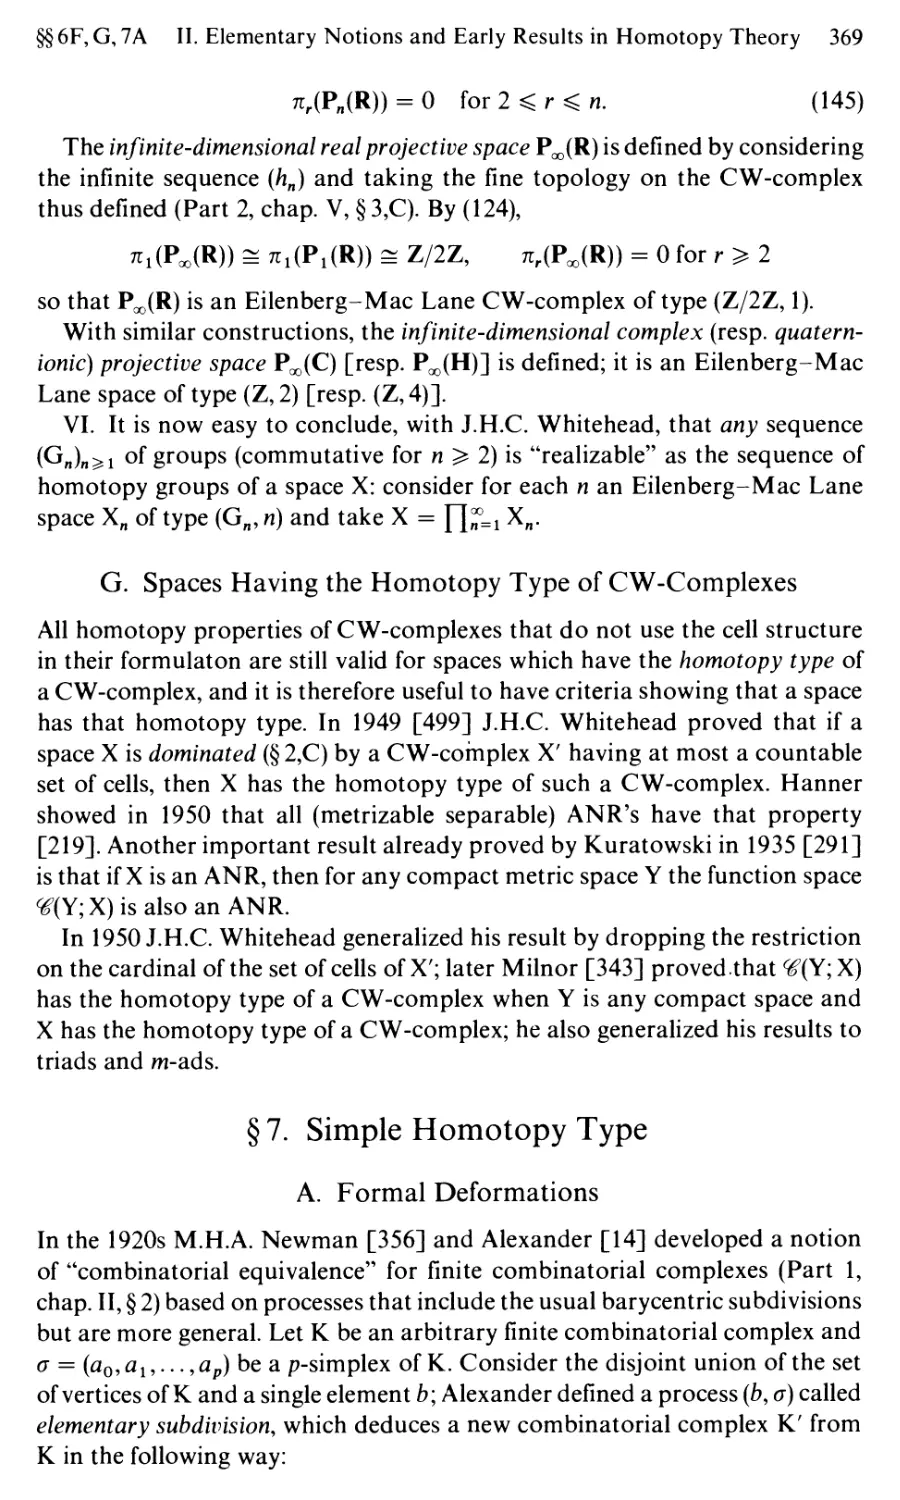 G. Spaces Having the Homotopy Type of CW-Complexes
§7. Simple Homotopy Type